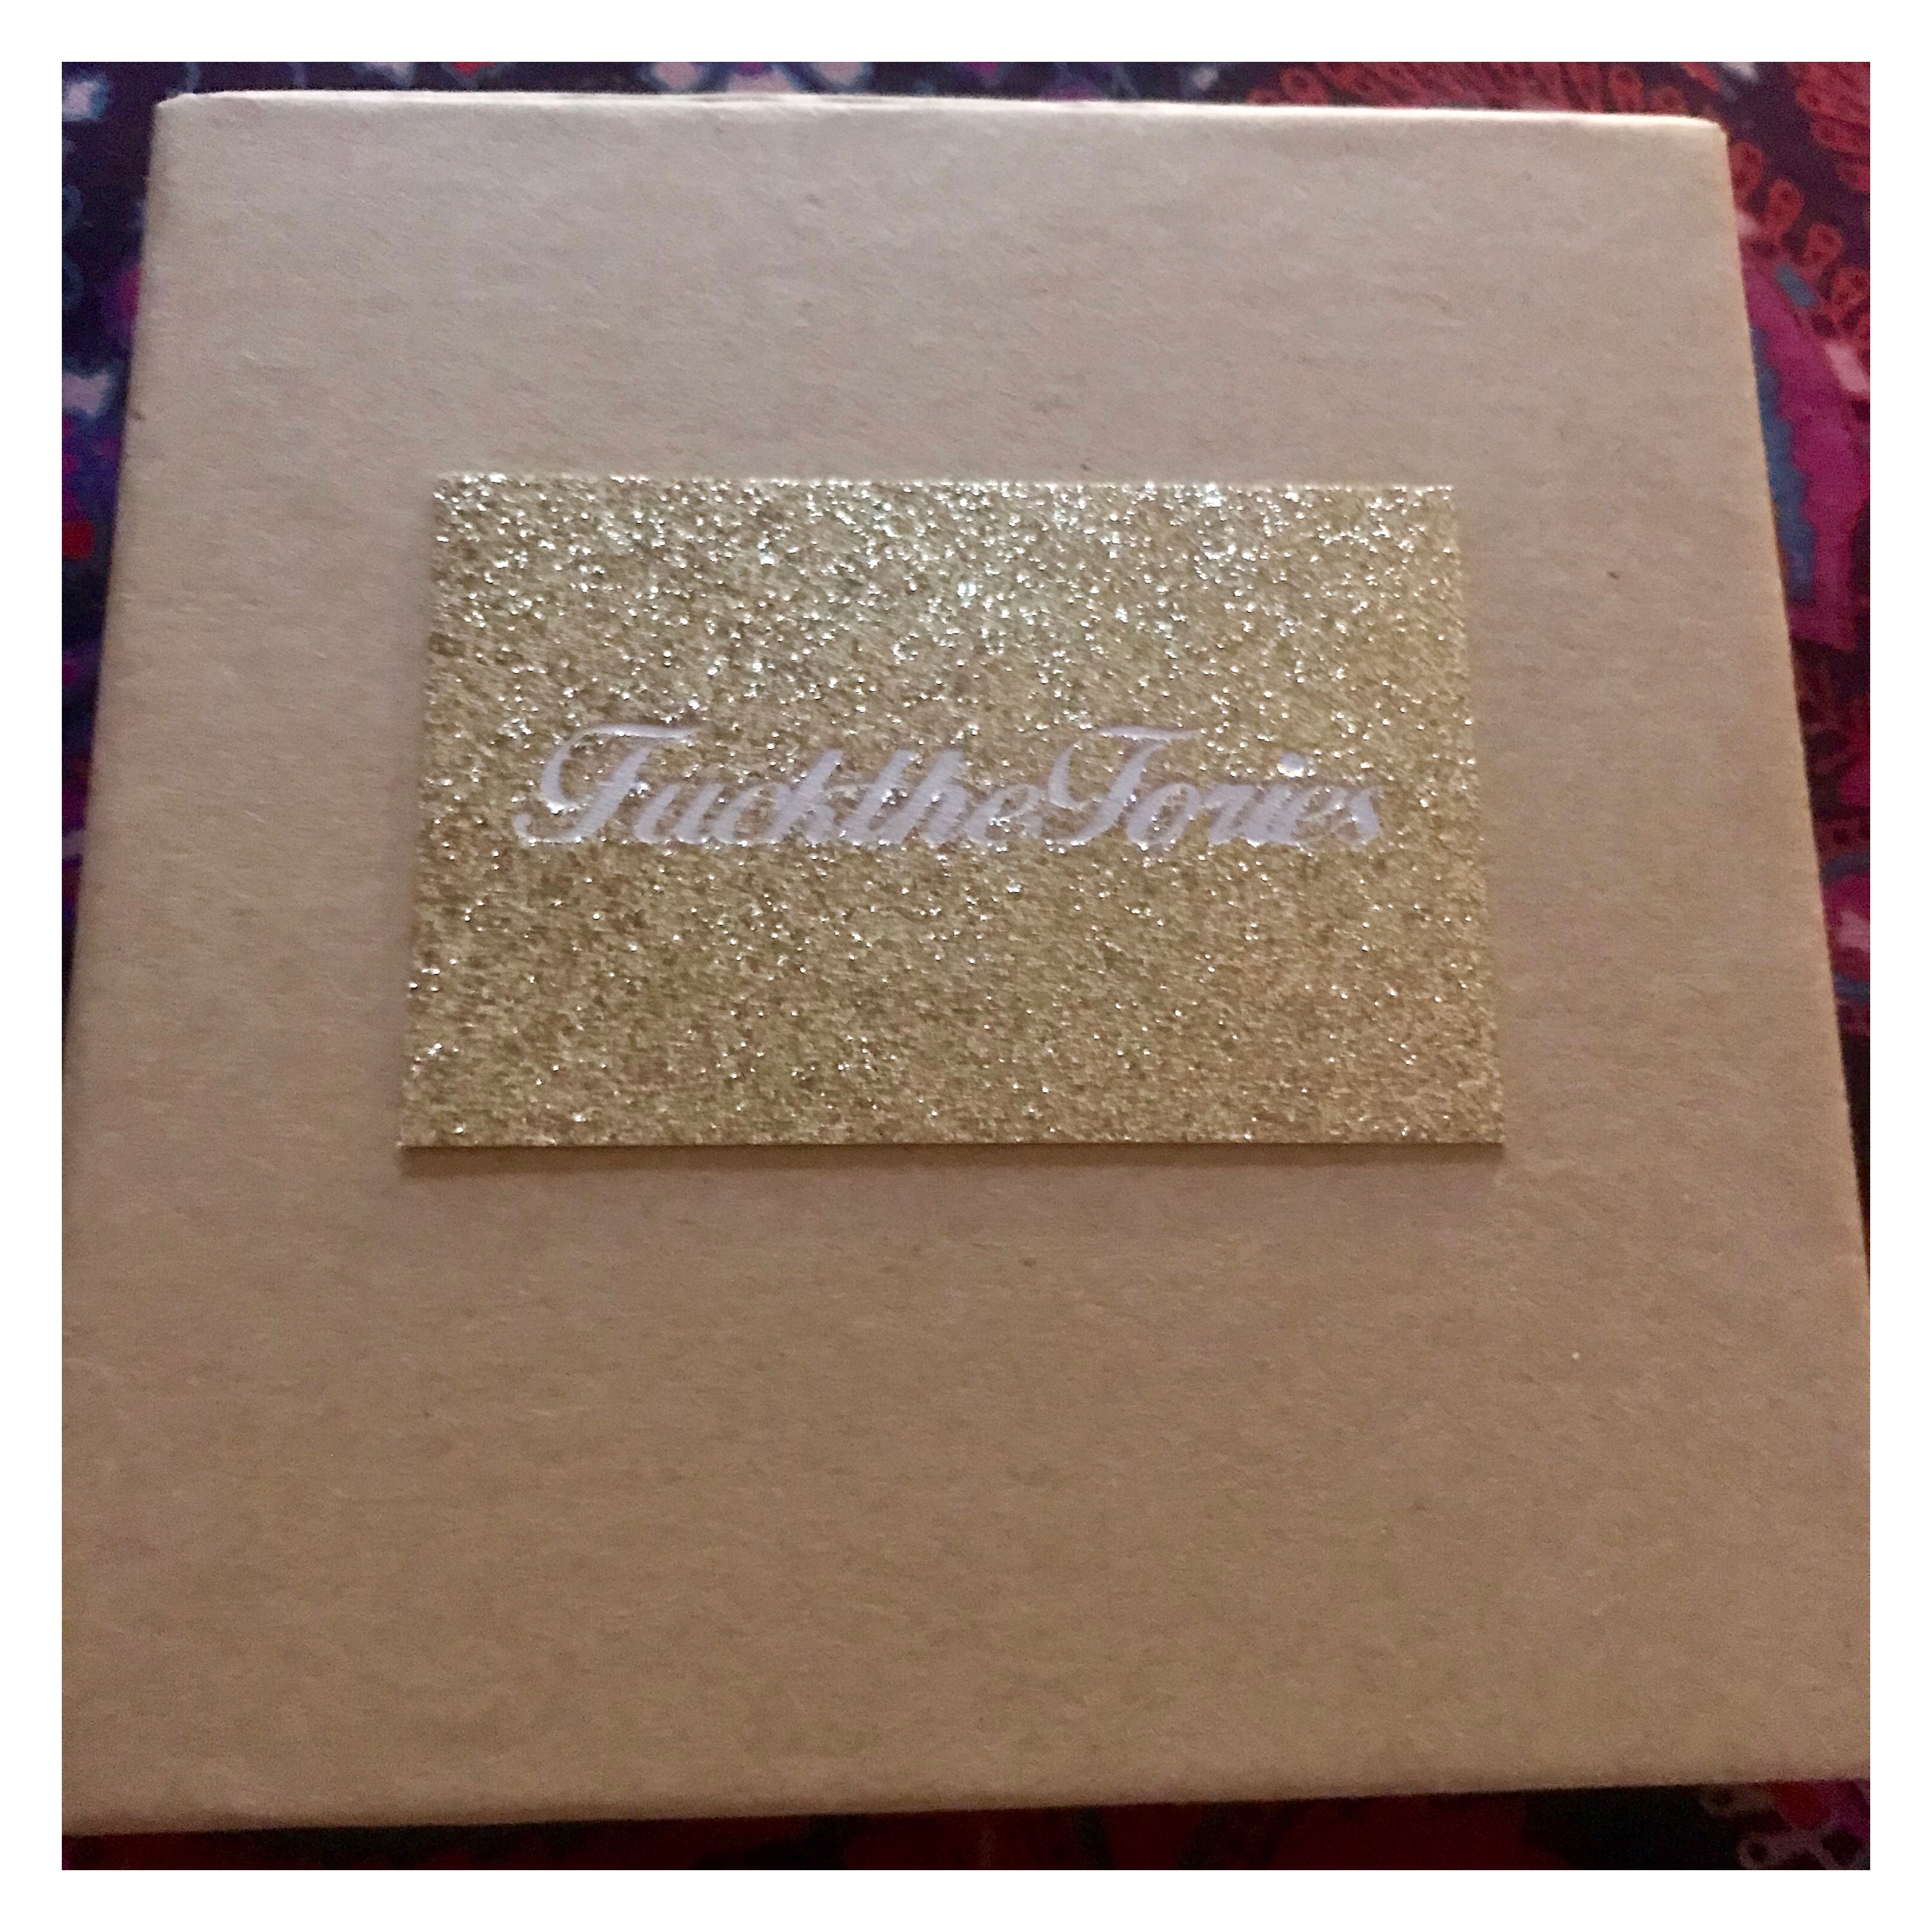 Jewellery box with glittery fuck the tories business card